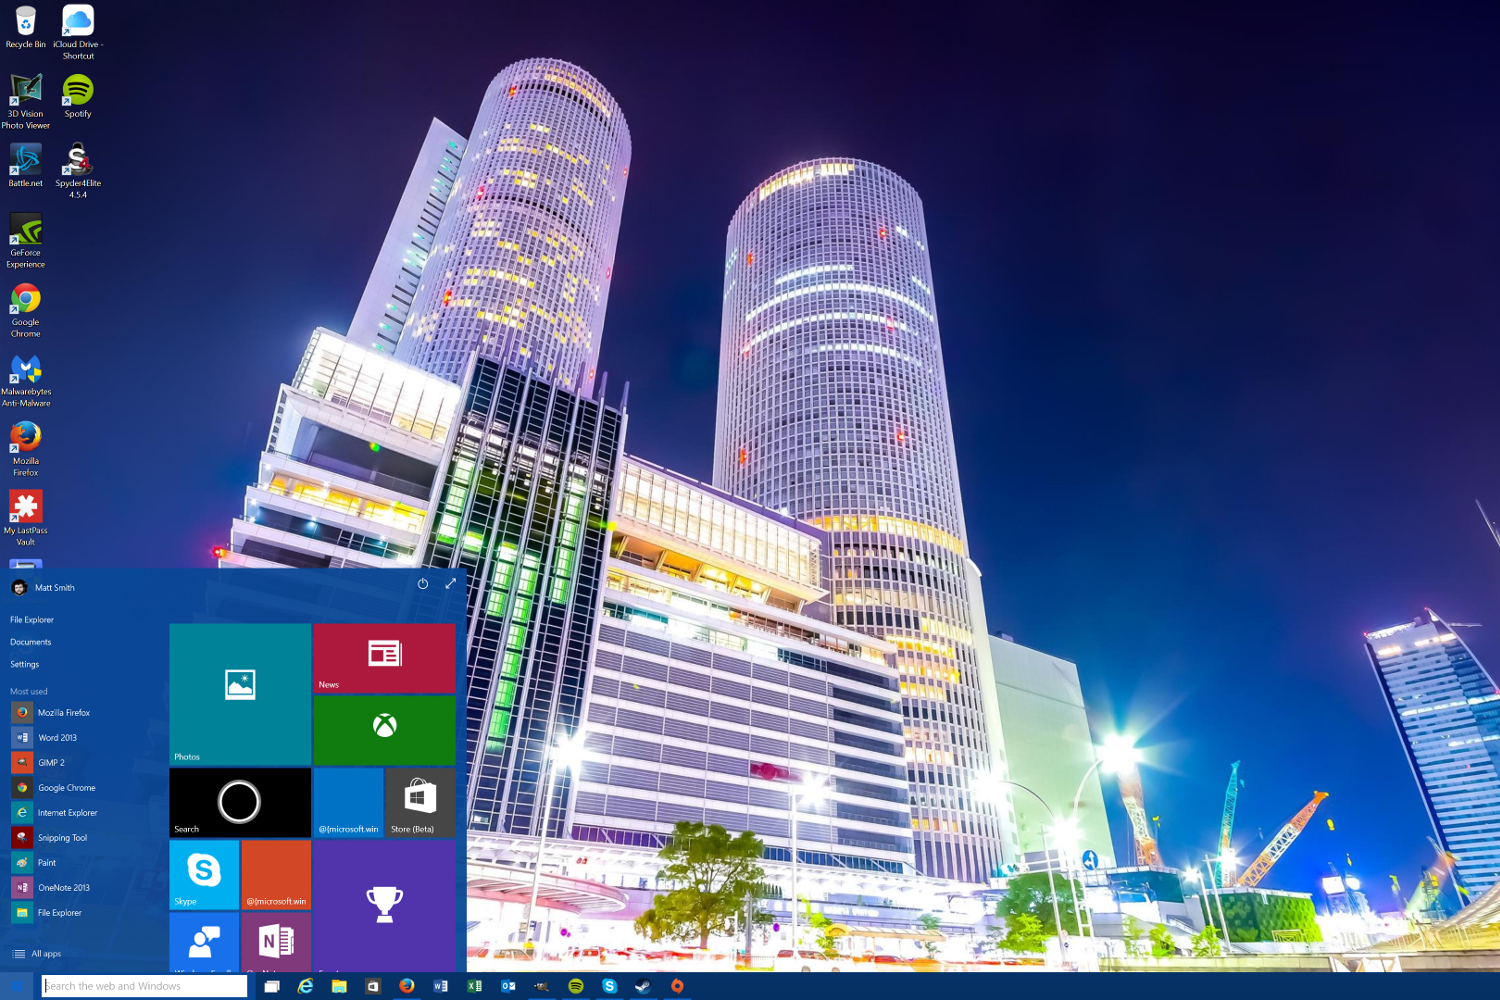 windows 10 technical preview updated to build 10041 with transparent start menu task view changes windows10build10041